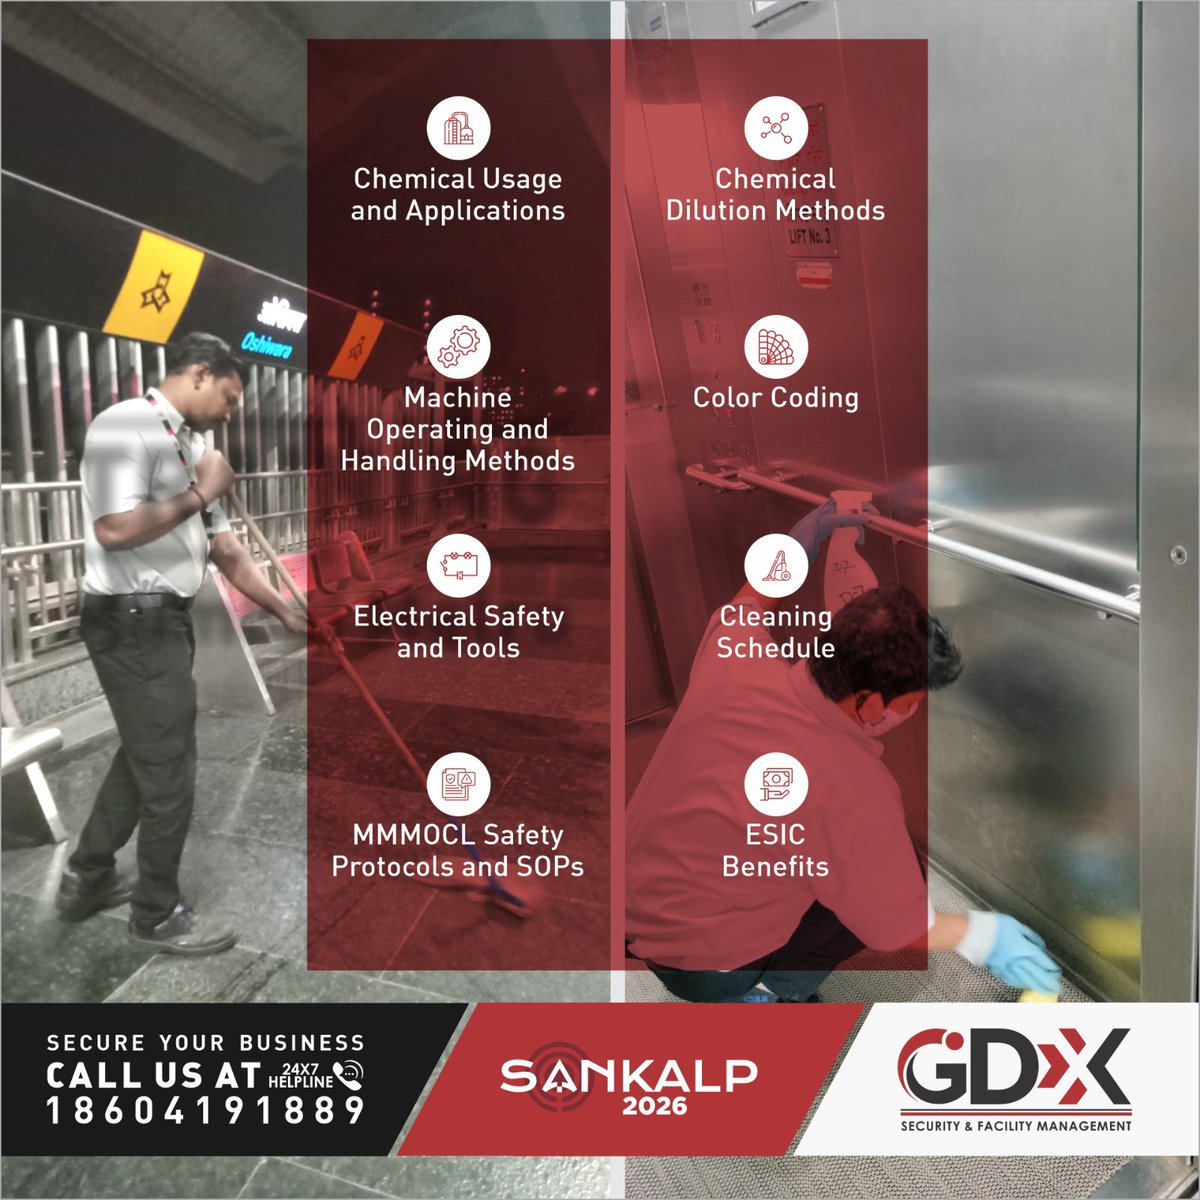 Grow and secure your business with us! Our commitment to excellence is reflected in our continuous training programs. 
Call us@18604191889

#BusinessSecurity #ContinuousTraining #24x7Support #Training #FEILDTRAINING #GDXGroup #Officesecurity #businessexpansion #Sankalp2026